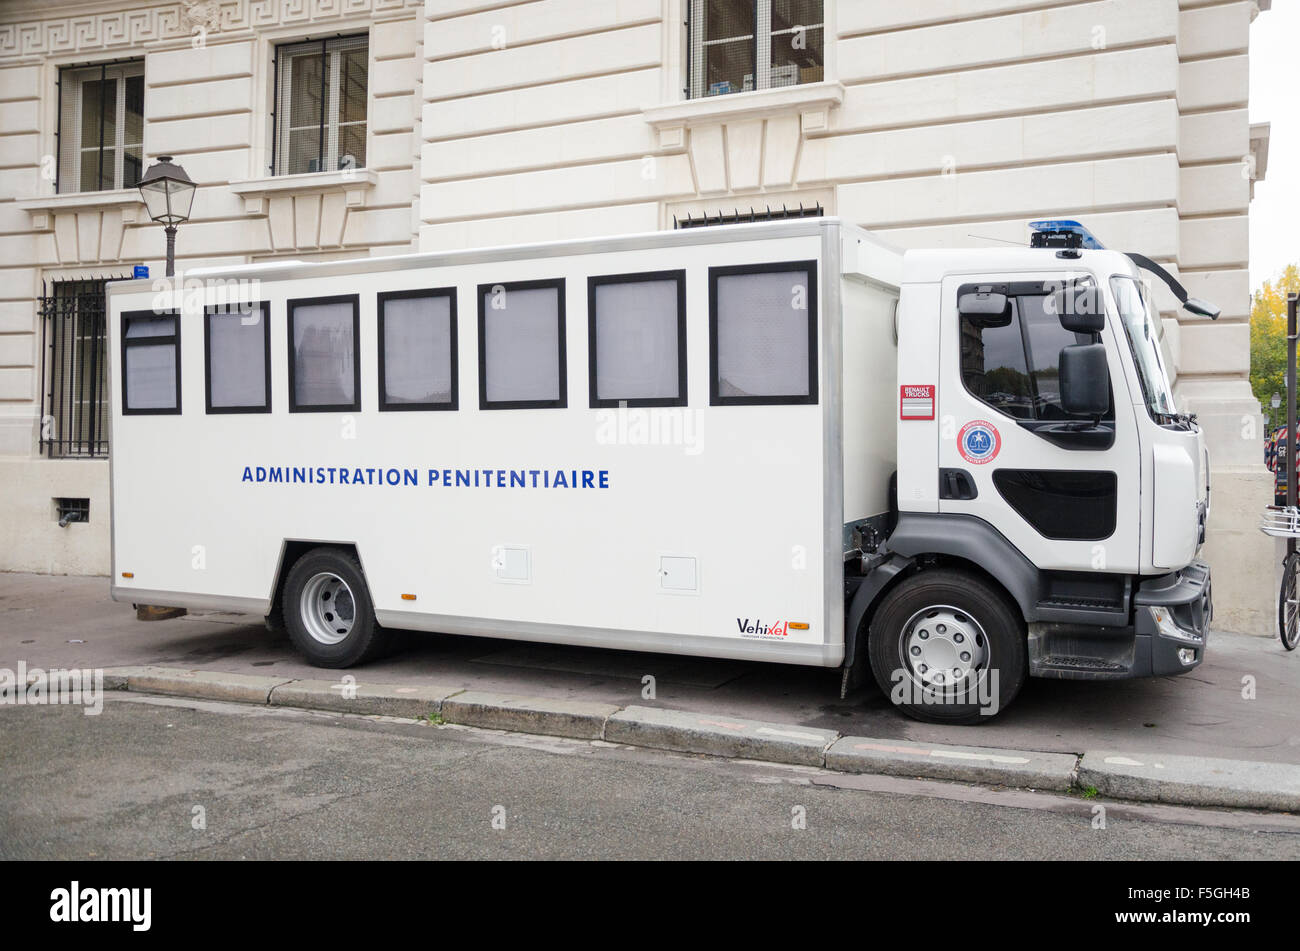 White penitentiary administration car bus vehicle outdoor in France Stock Photo